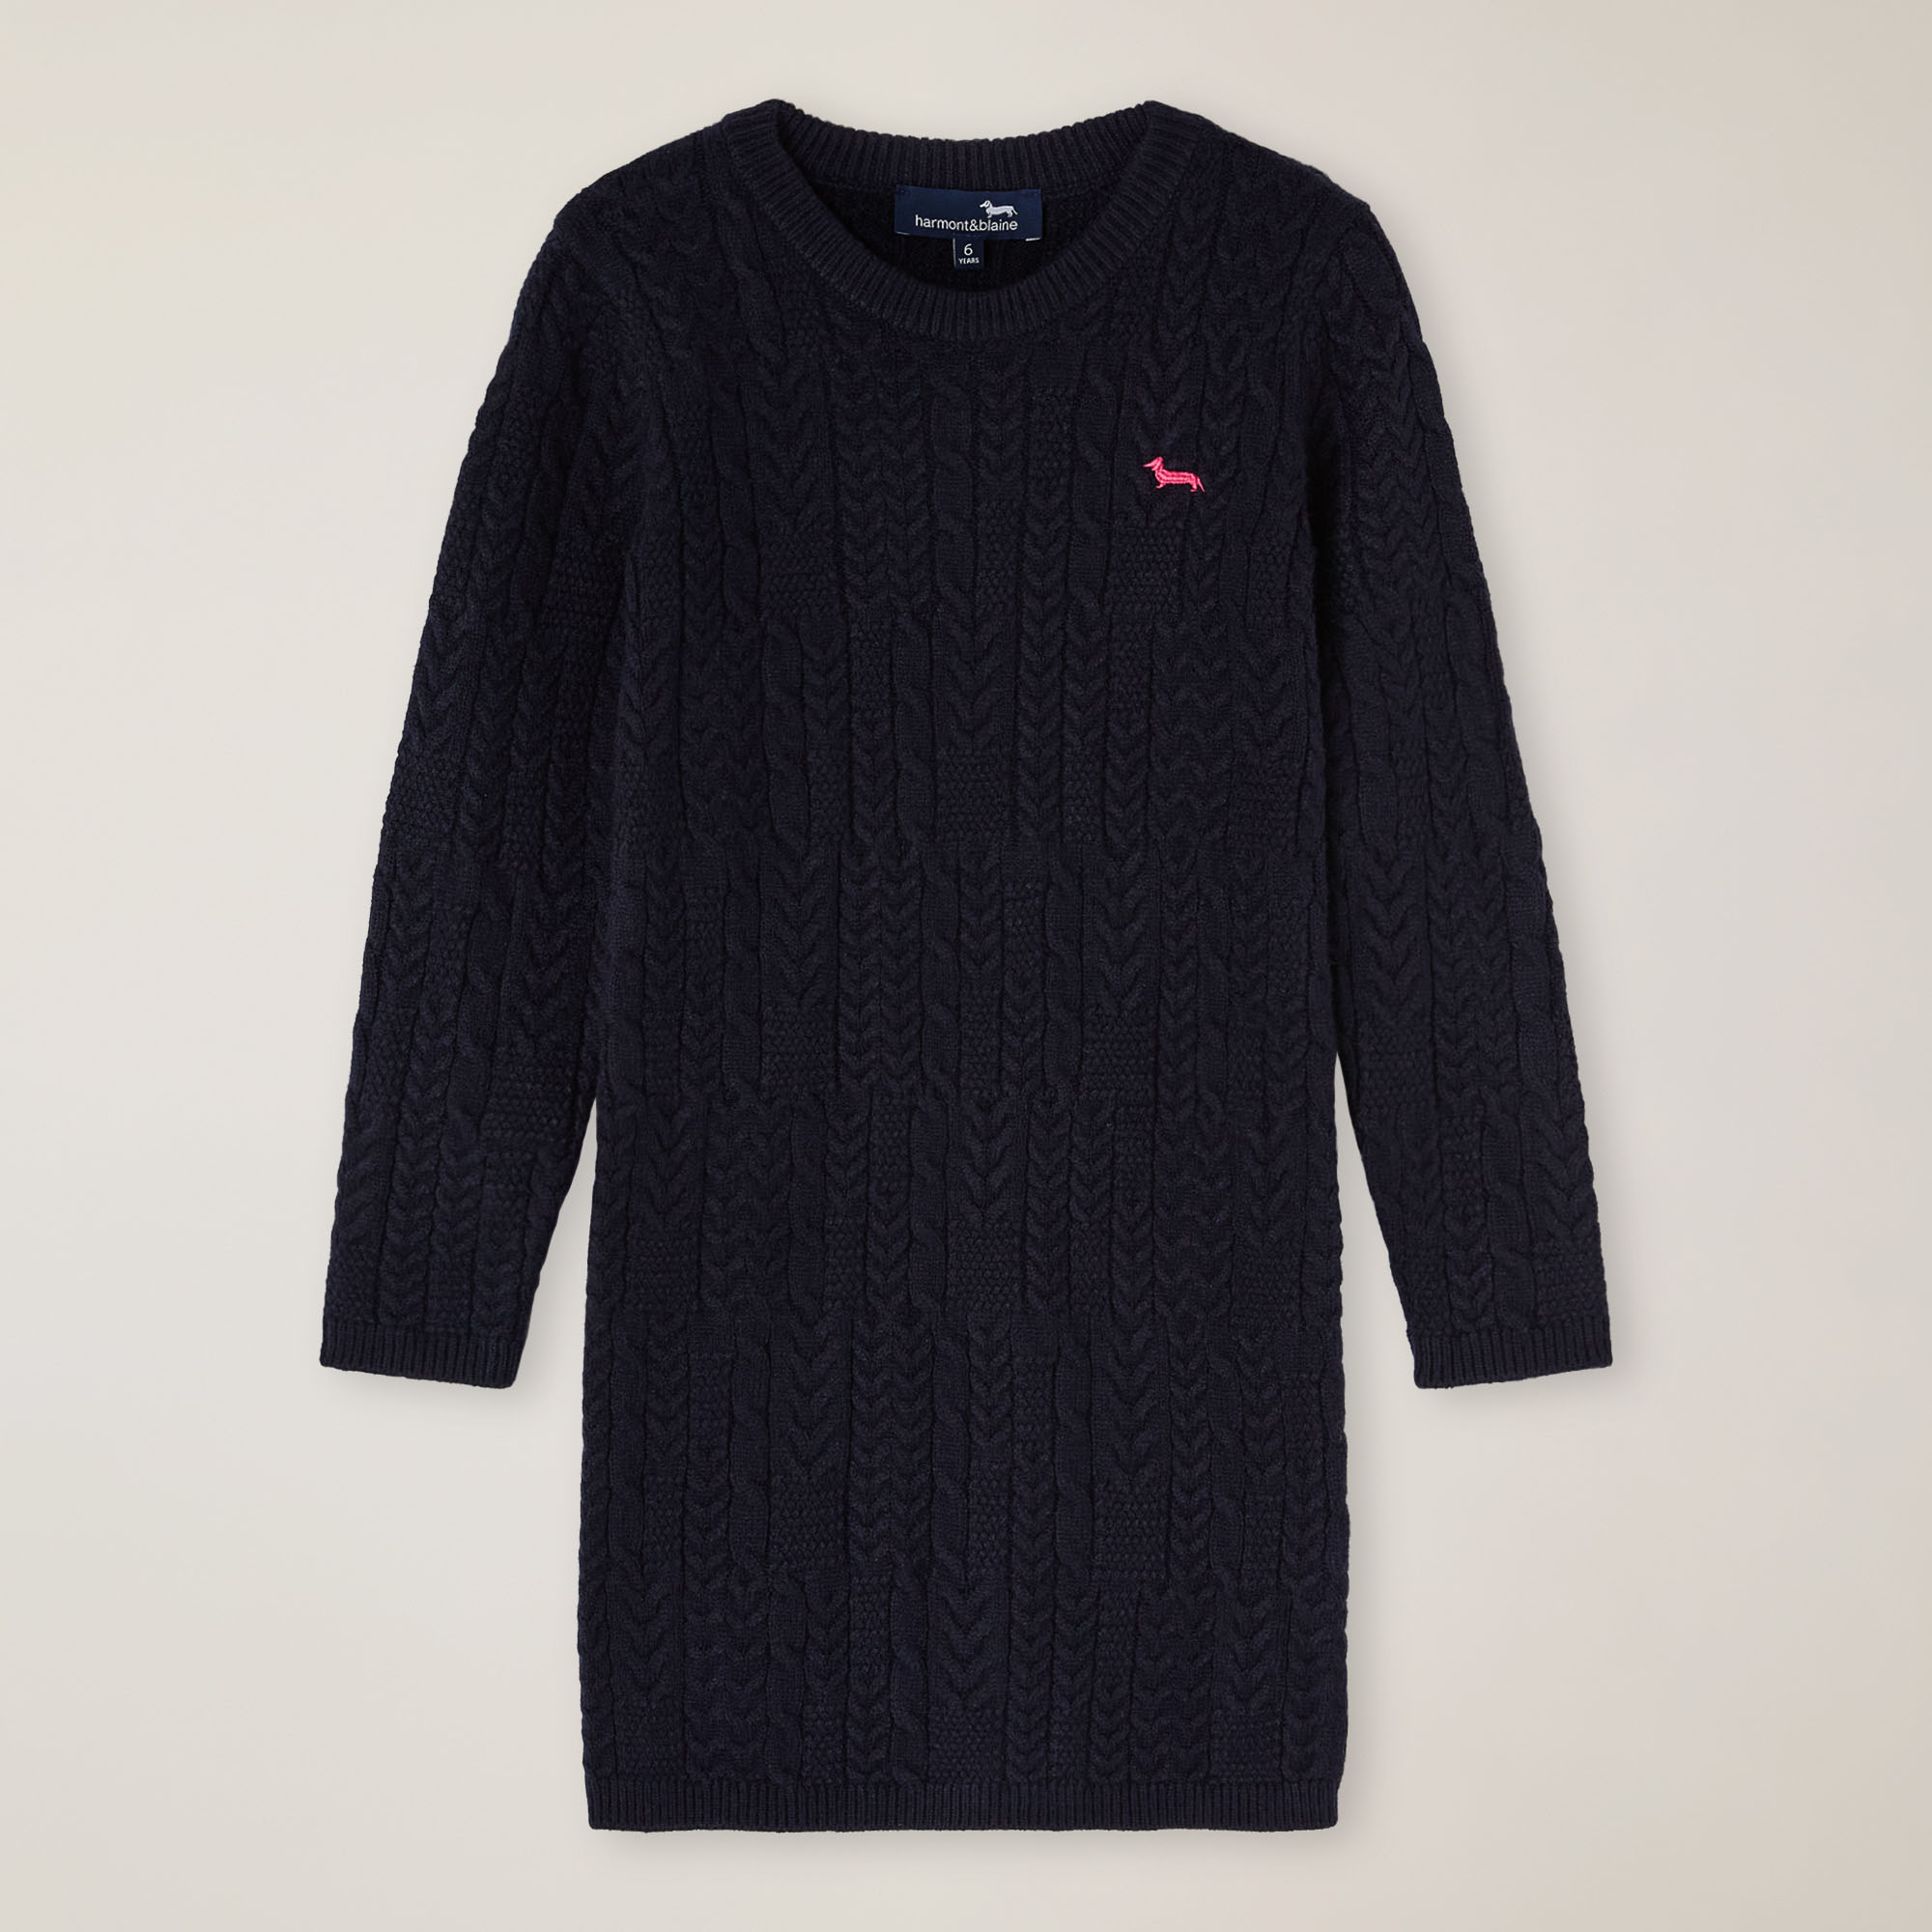 Knitted dress, Blu Navy, large